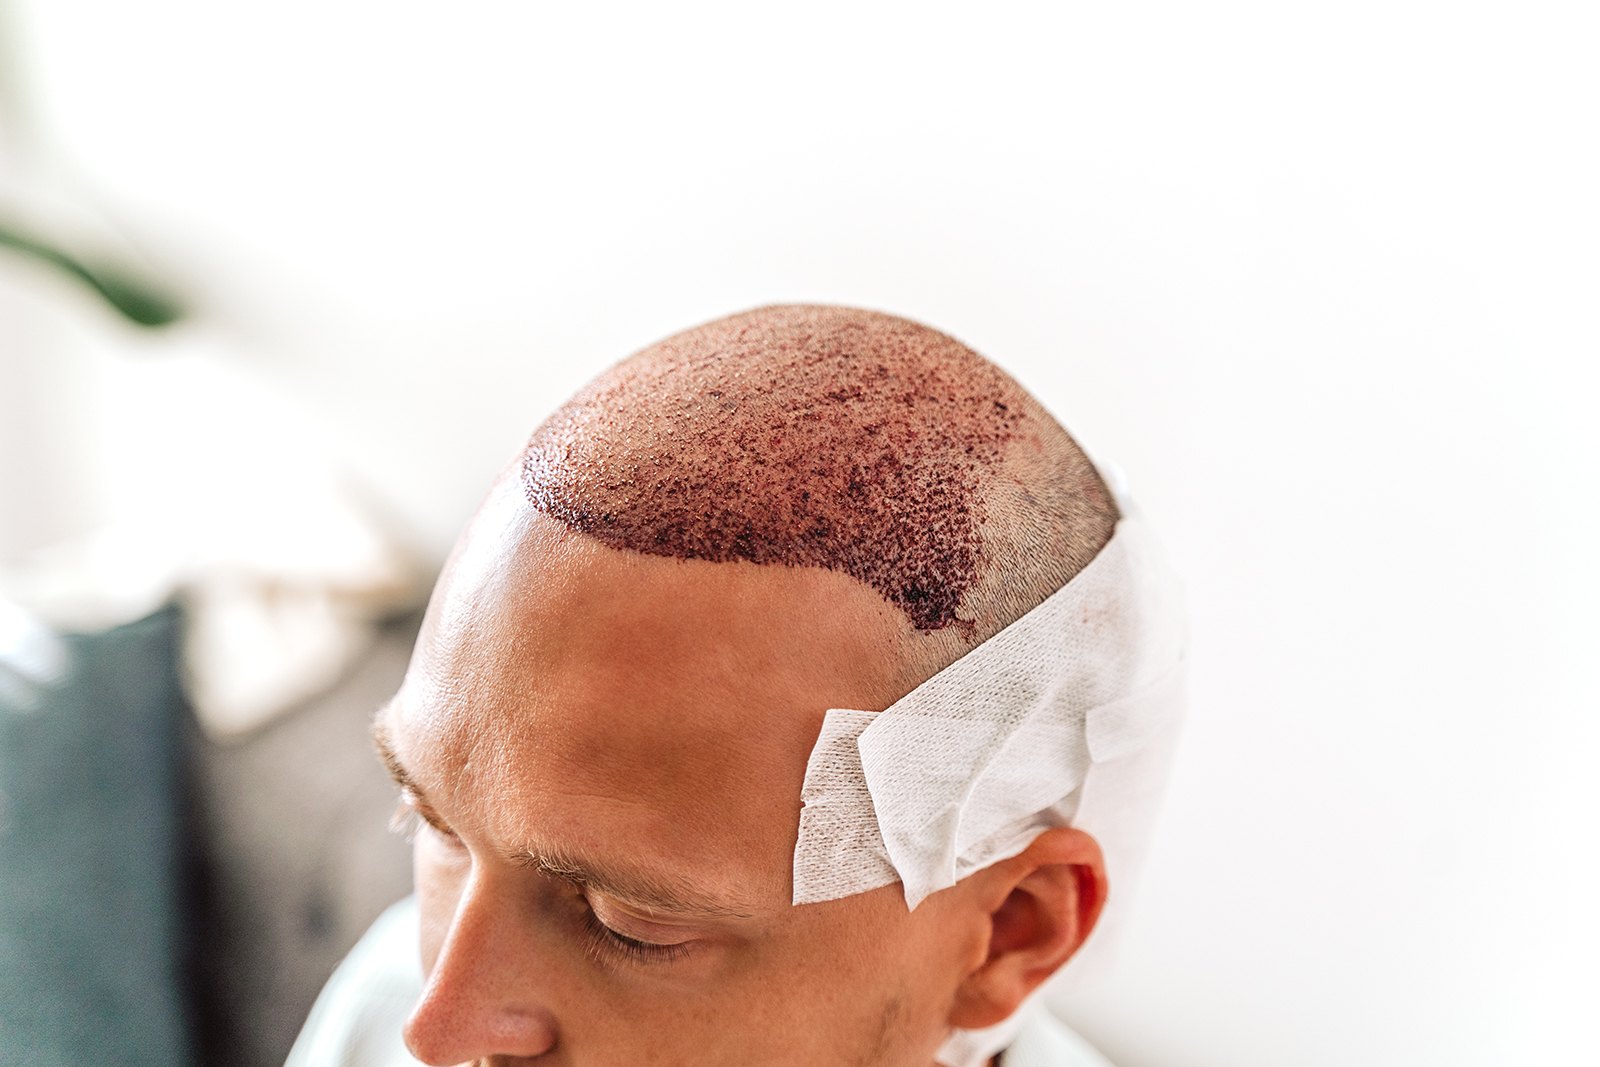 What is an FUE hair transplant?